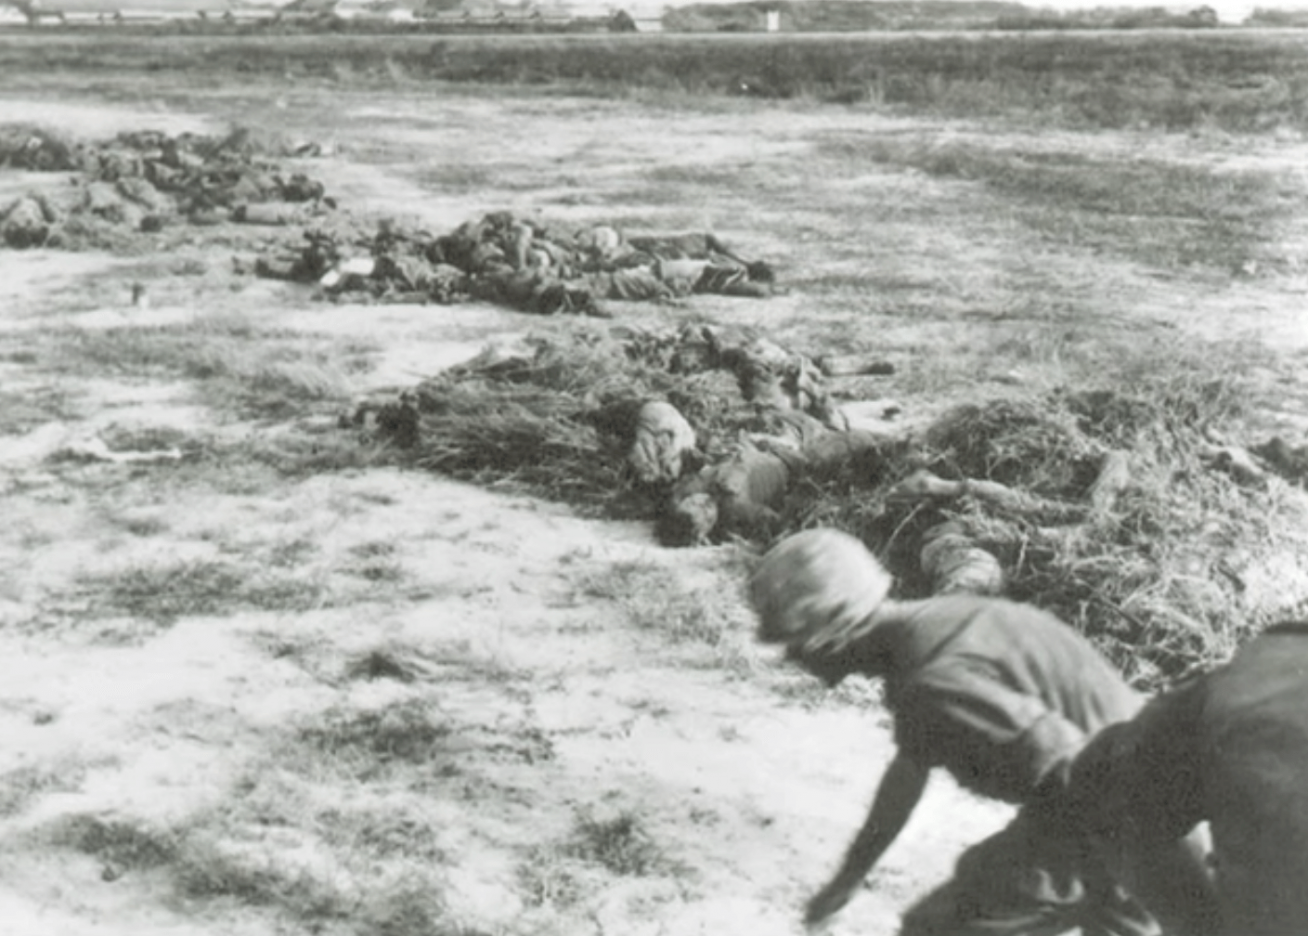 A soldier running and ducking in a field. There appear to be bodies on the ground in the background.